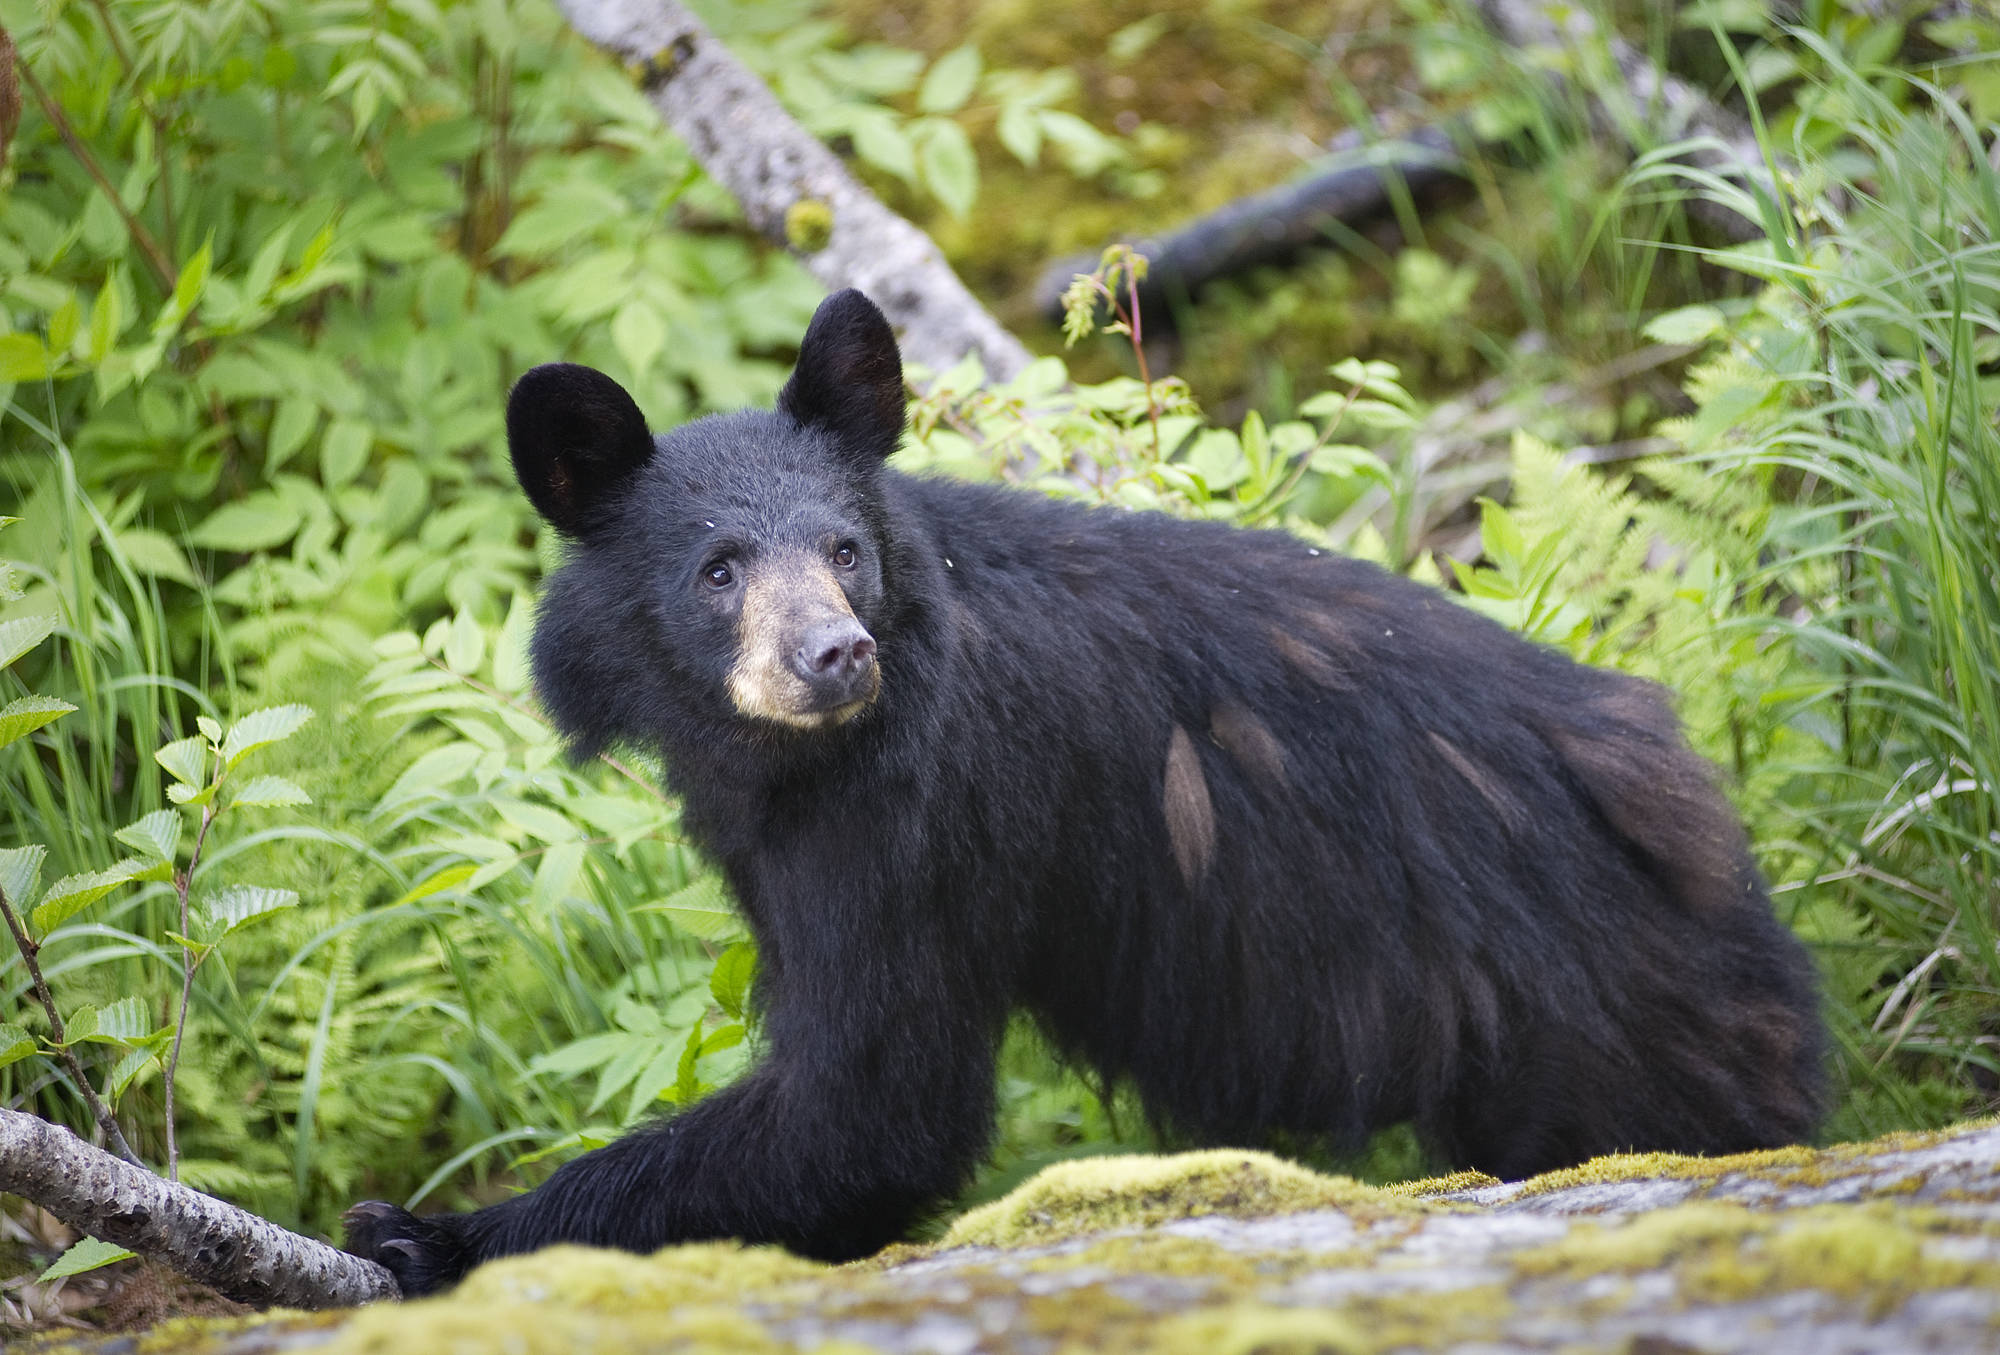 In this June 2012 file photo, a yearling black bear stops to view the tourists after crossing the trail to Photo Point at the Mendenhall Glacier Visitors Center. (Michael Penn | Juneau Empire file)